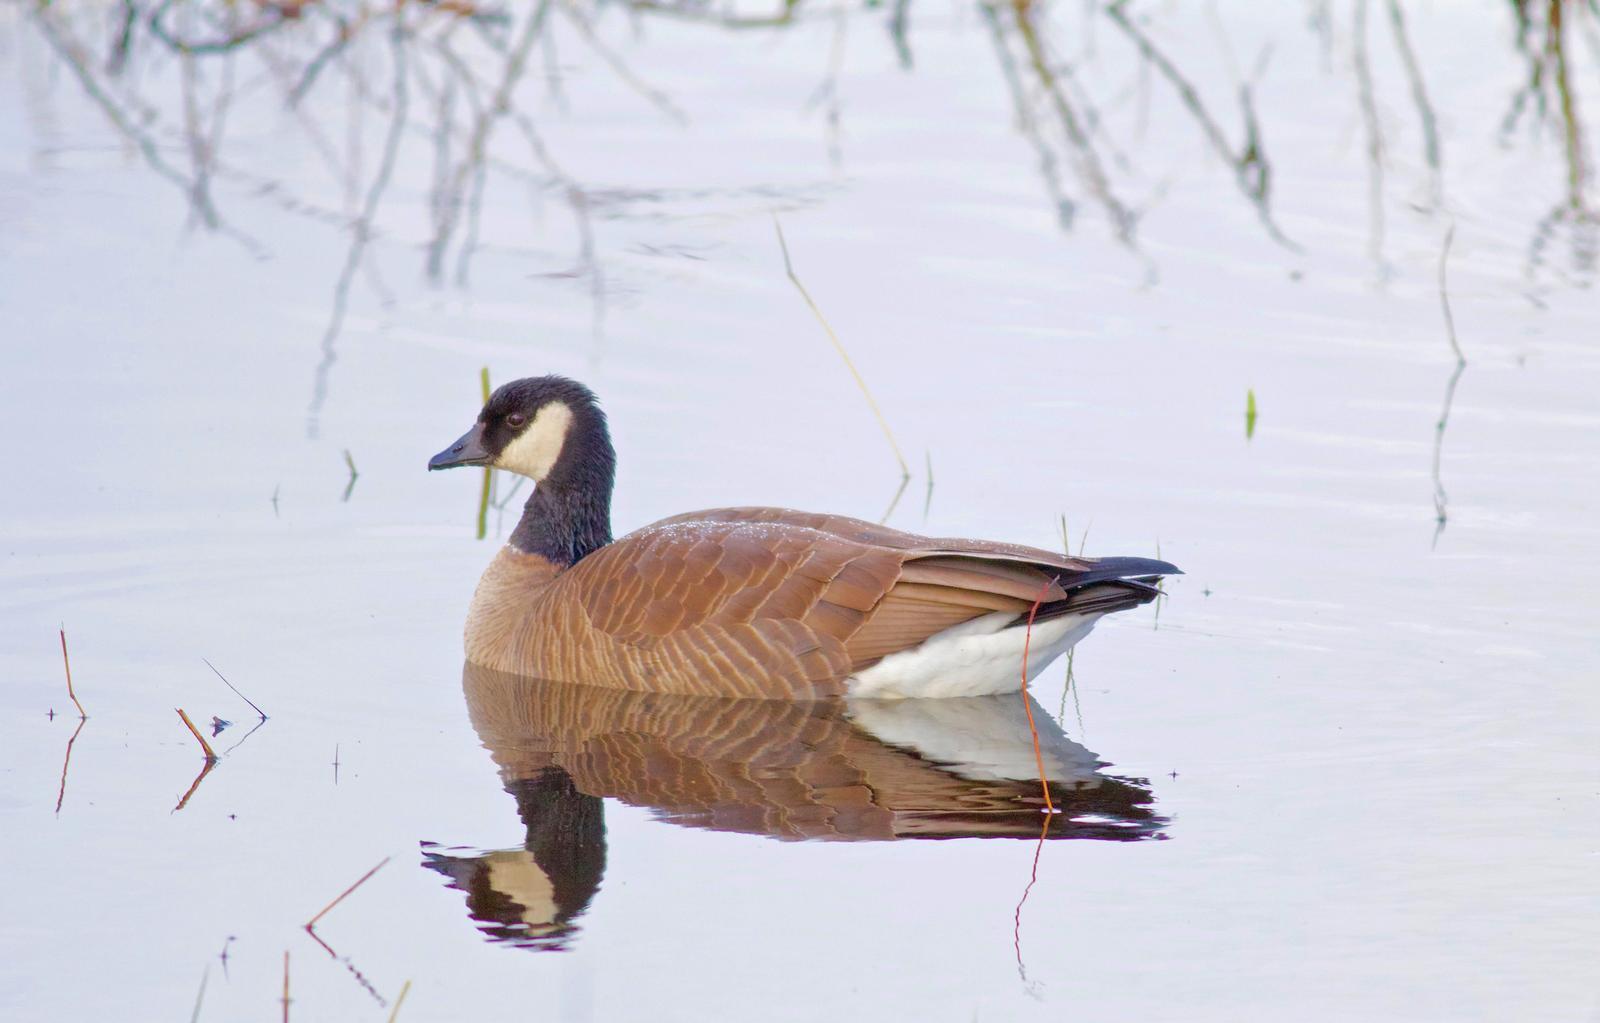 Cackling Goose Photo by Kathryn Keith